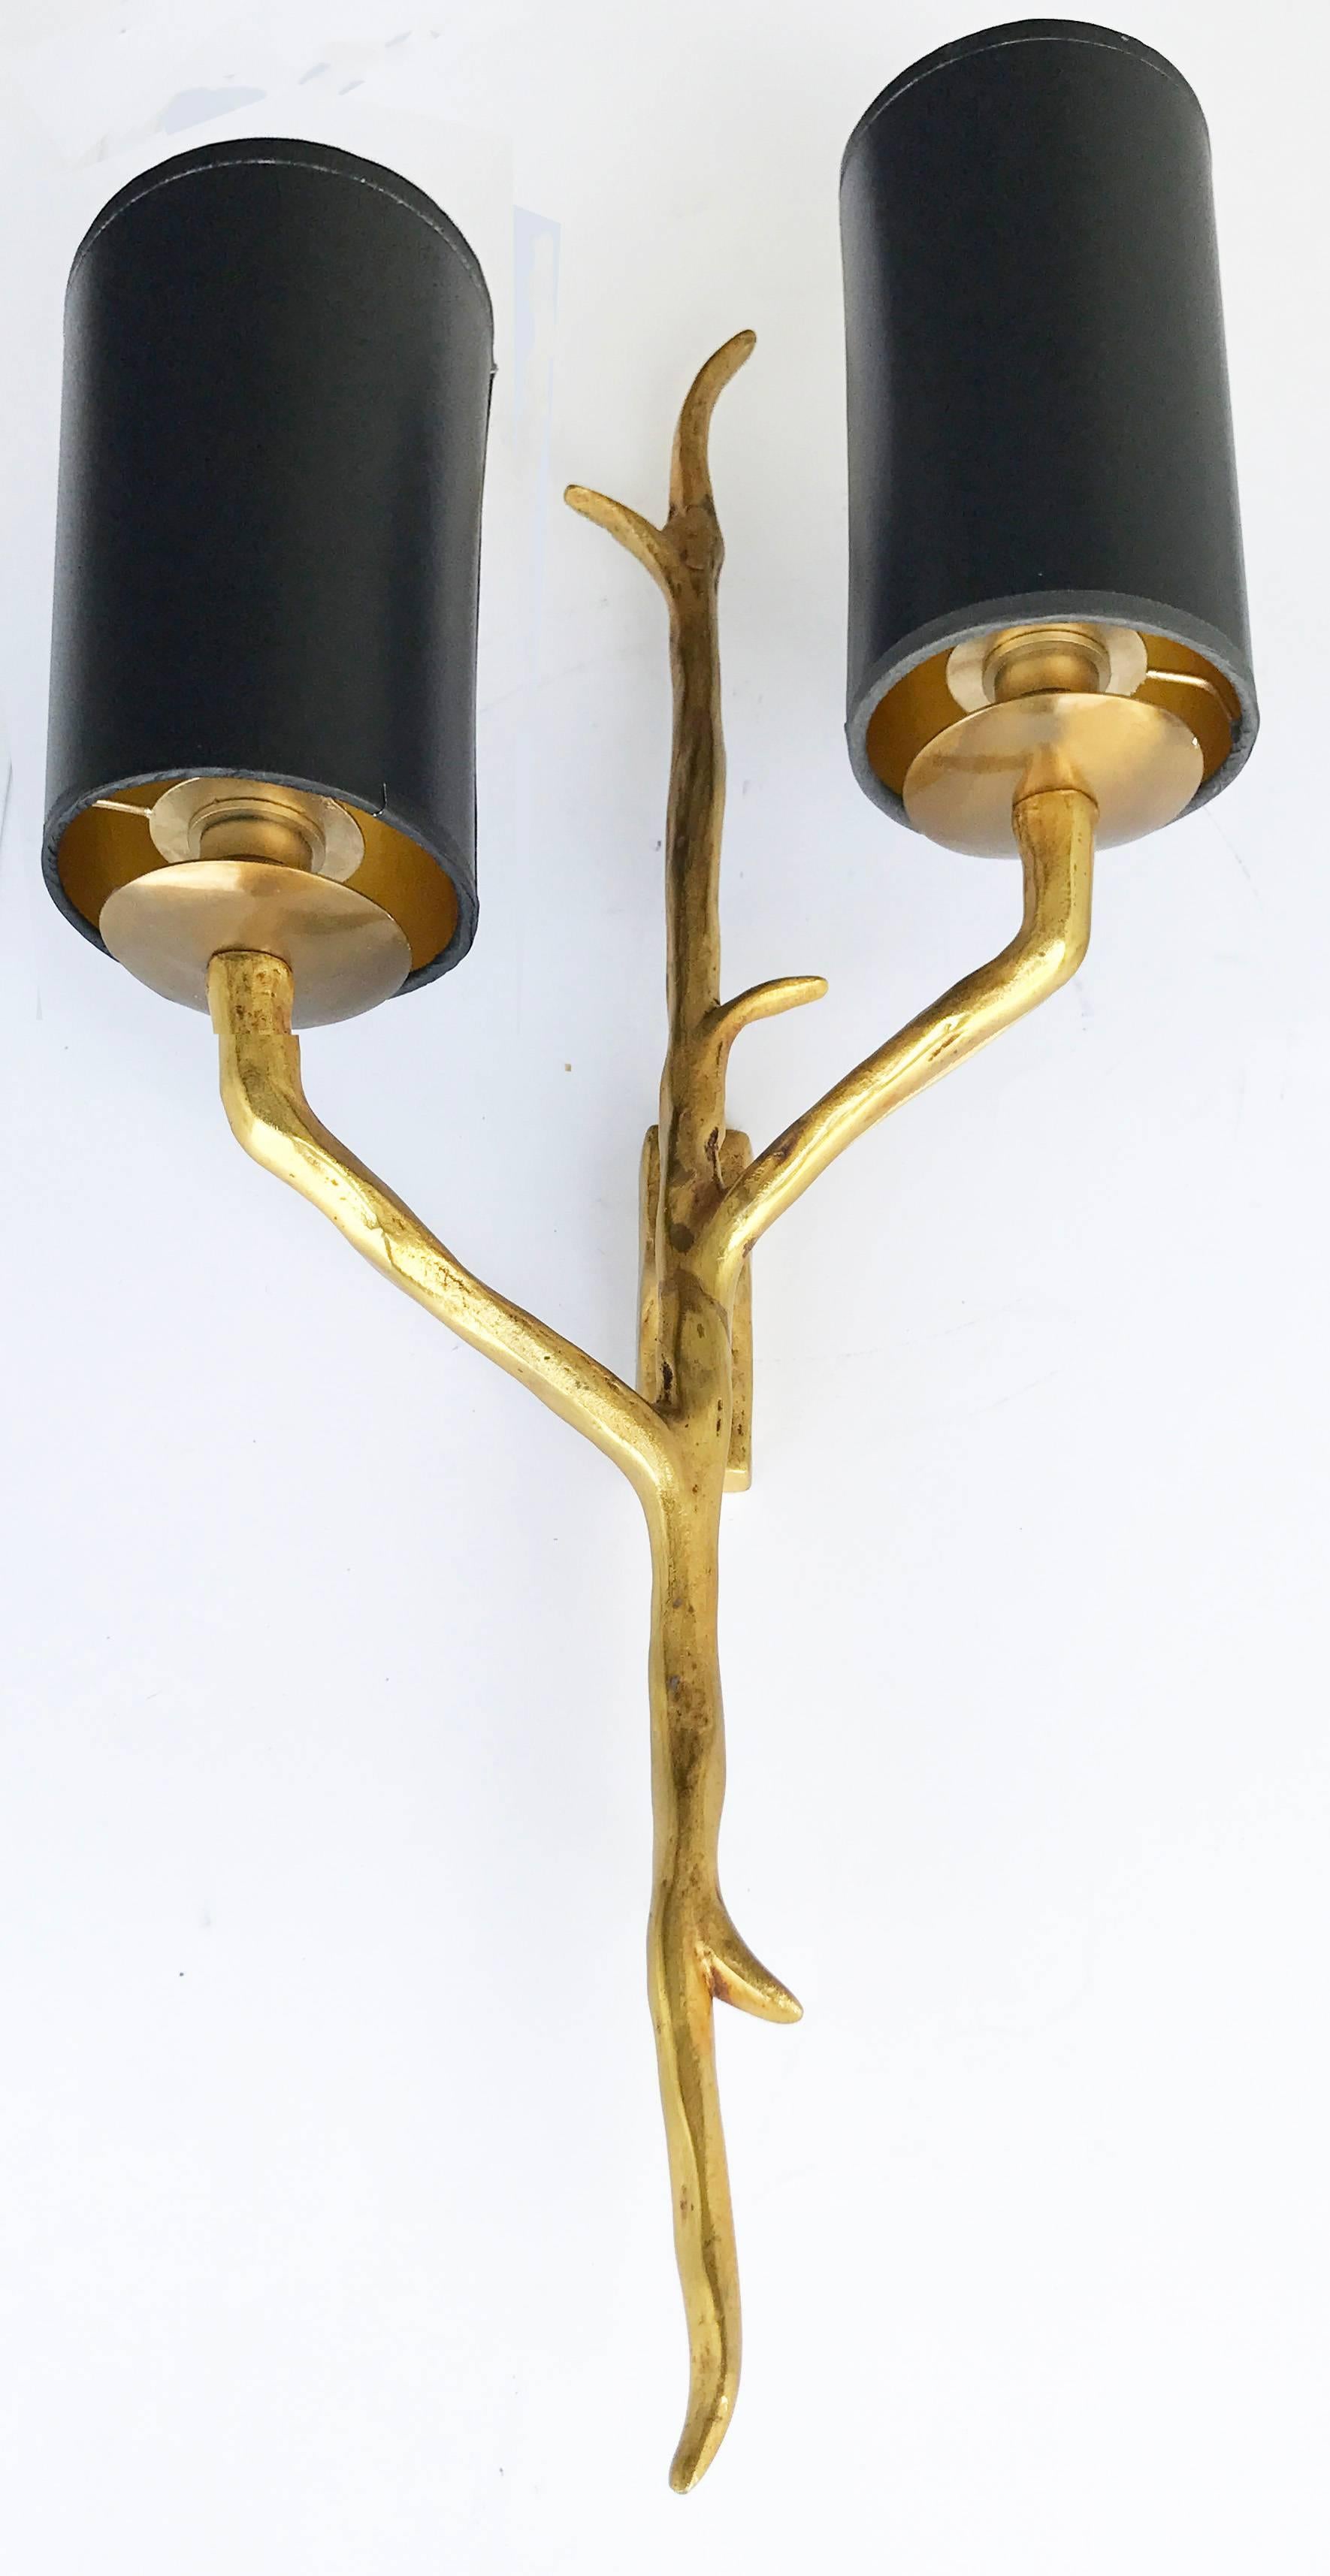 Superb pair of Agostini style bronze sconces
Two lights, 85 watt max per bulb
US rewired and in working condition
Back plate dimension: 4 inches high, 1 3/8 wide
Custom backplate available.